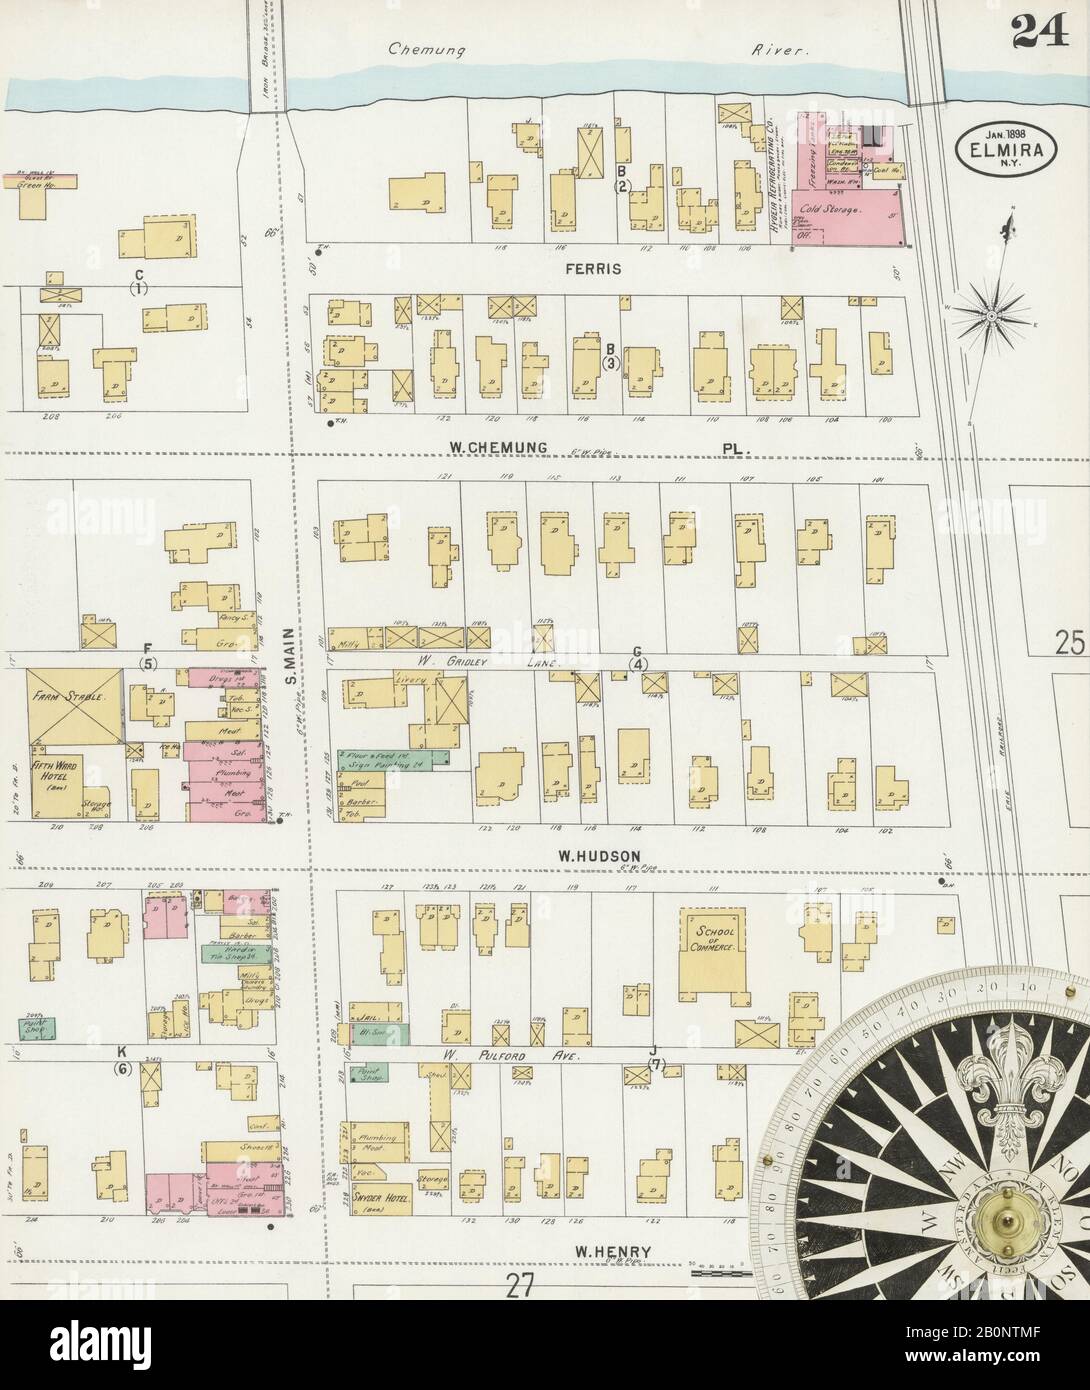 Image 24 of Sanborn Fire Insurance Map from Elmira, Chemung County, New York. Jan 1898. 35 Sheet(s), America, street map with a Nineteenth Century compass Stock Photo